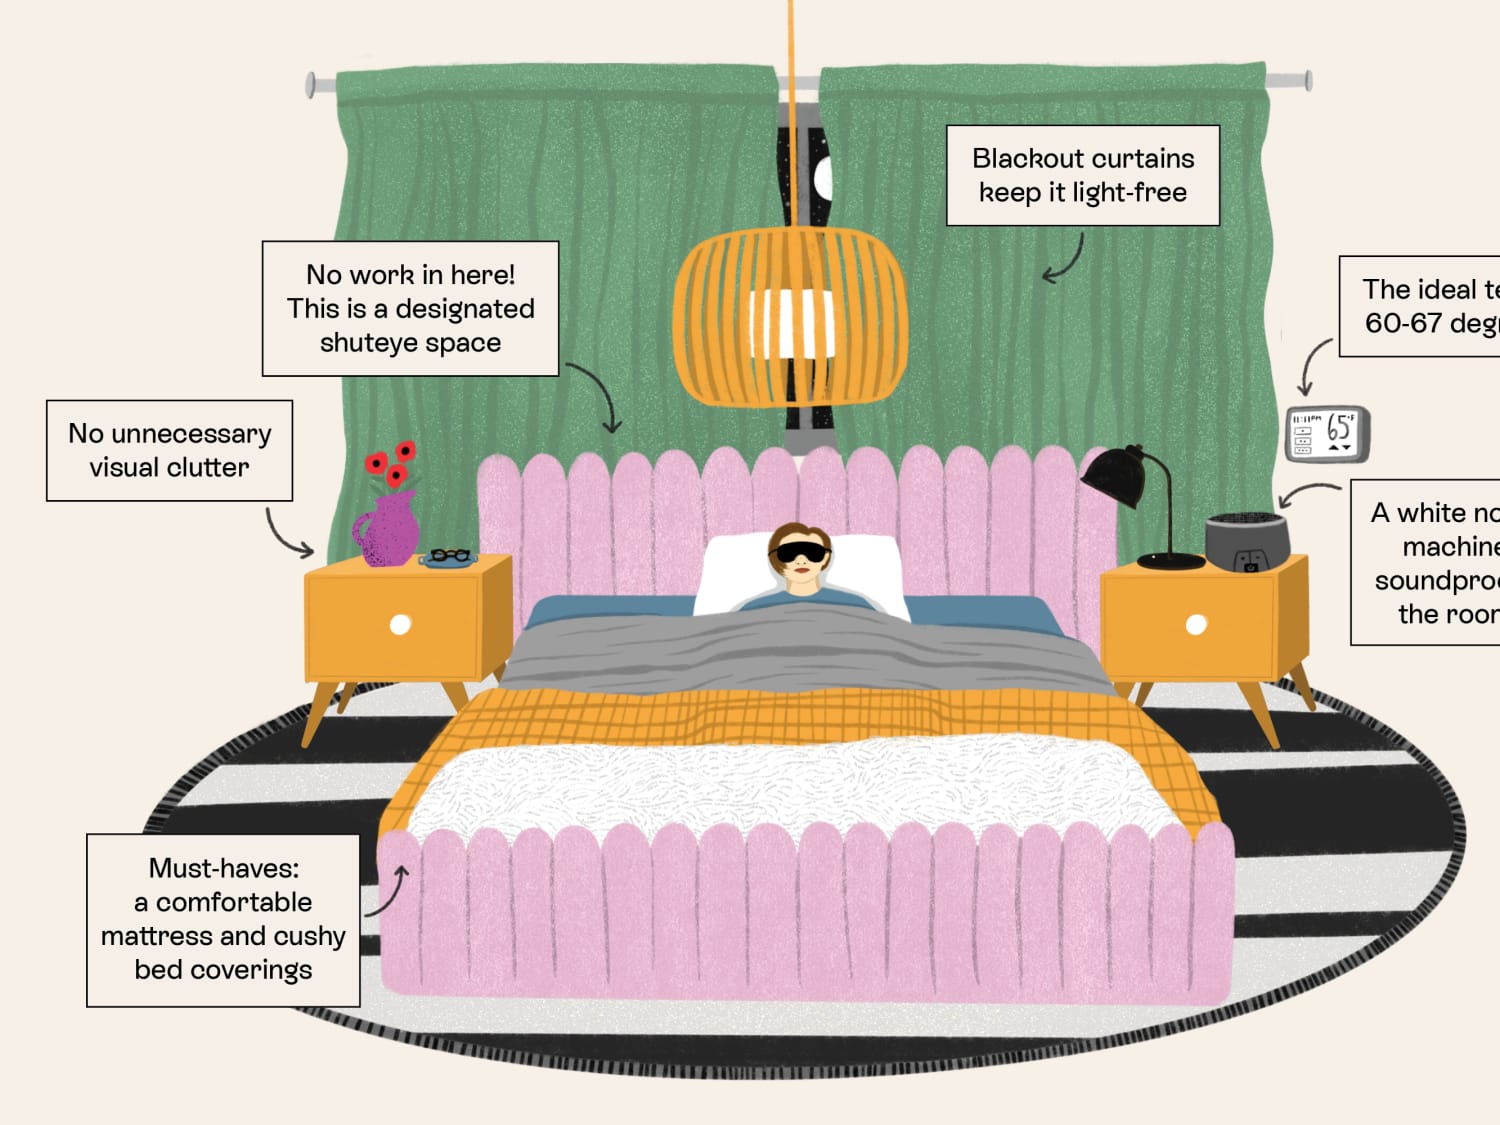 How to Arrange Bedroom Furniture for the Ultimate Sleeping Space